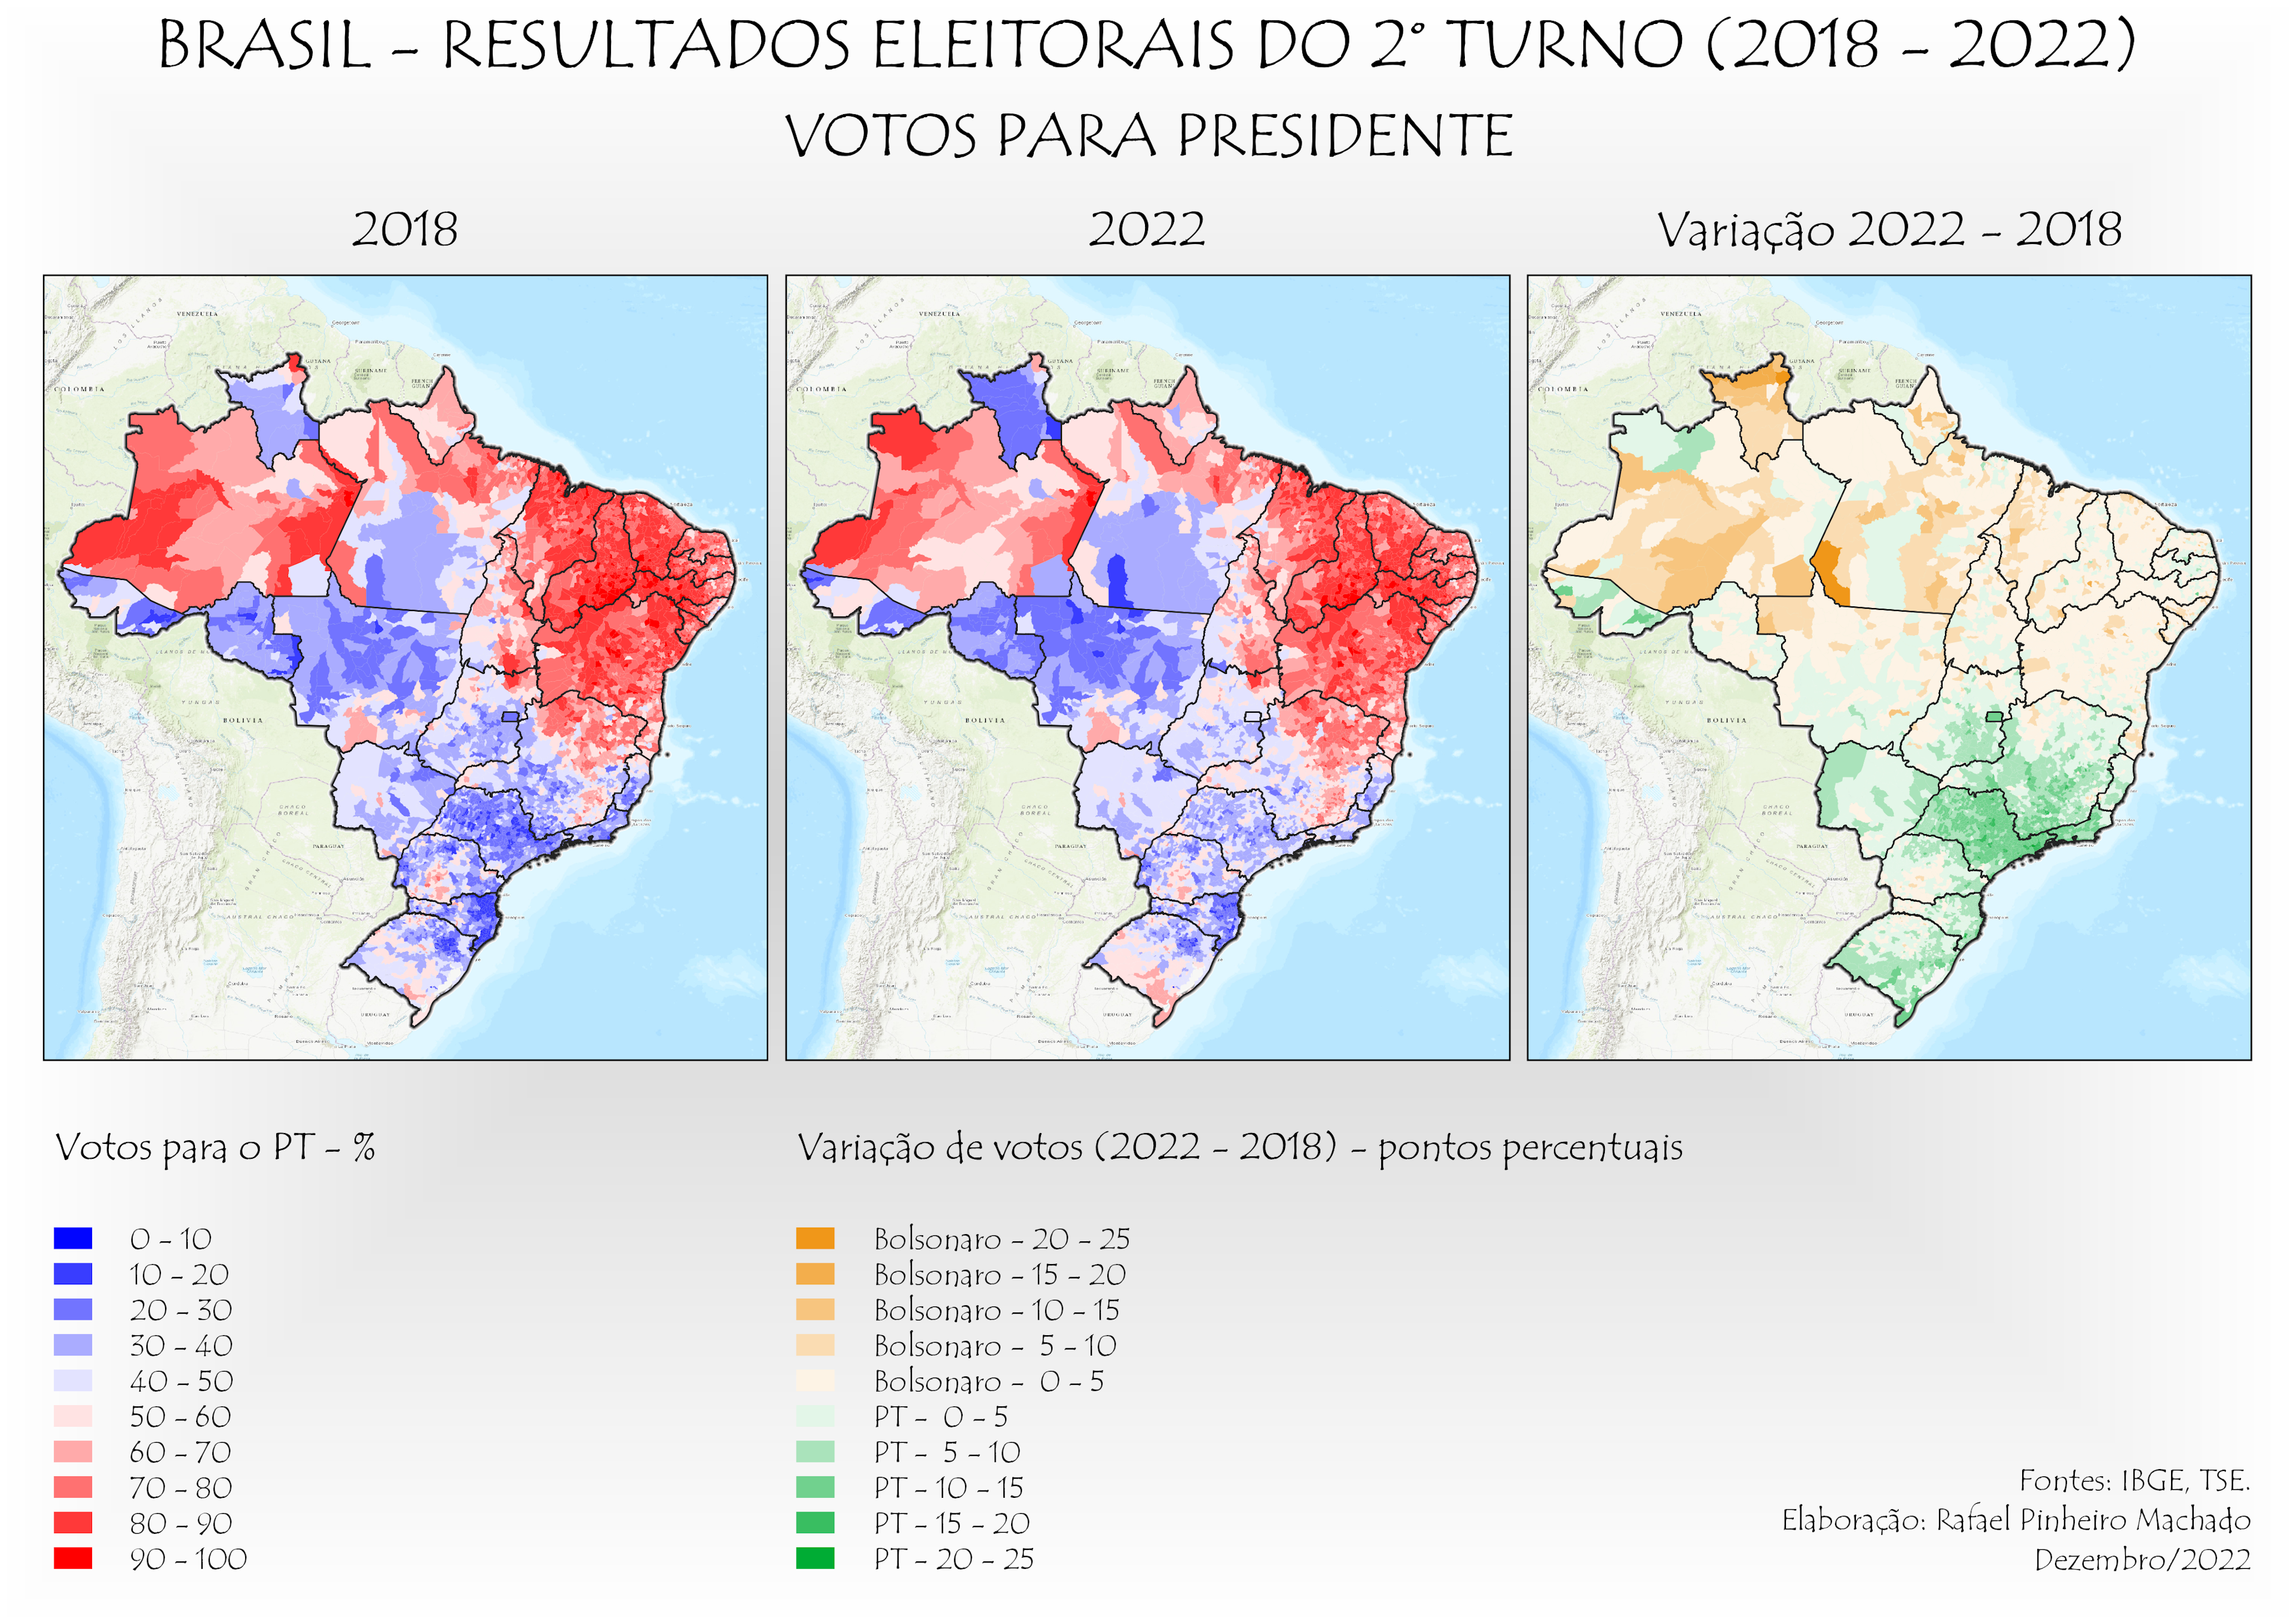 Brazil - Federal elections (2018 - 2022)